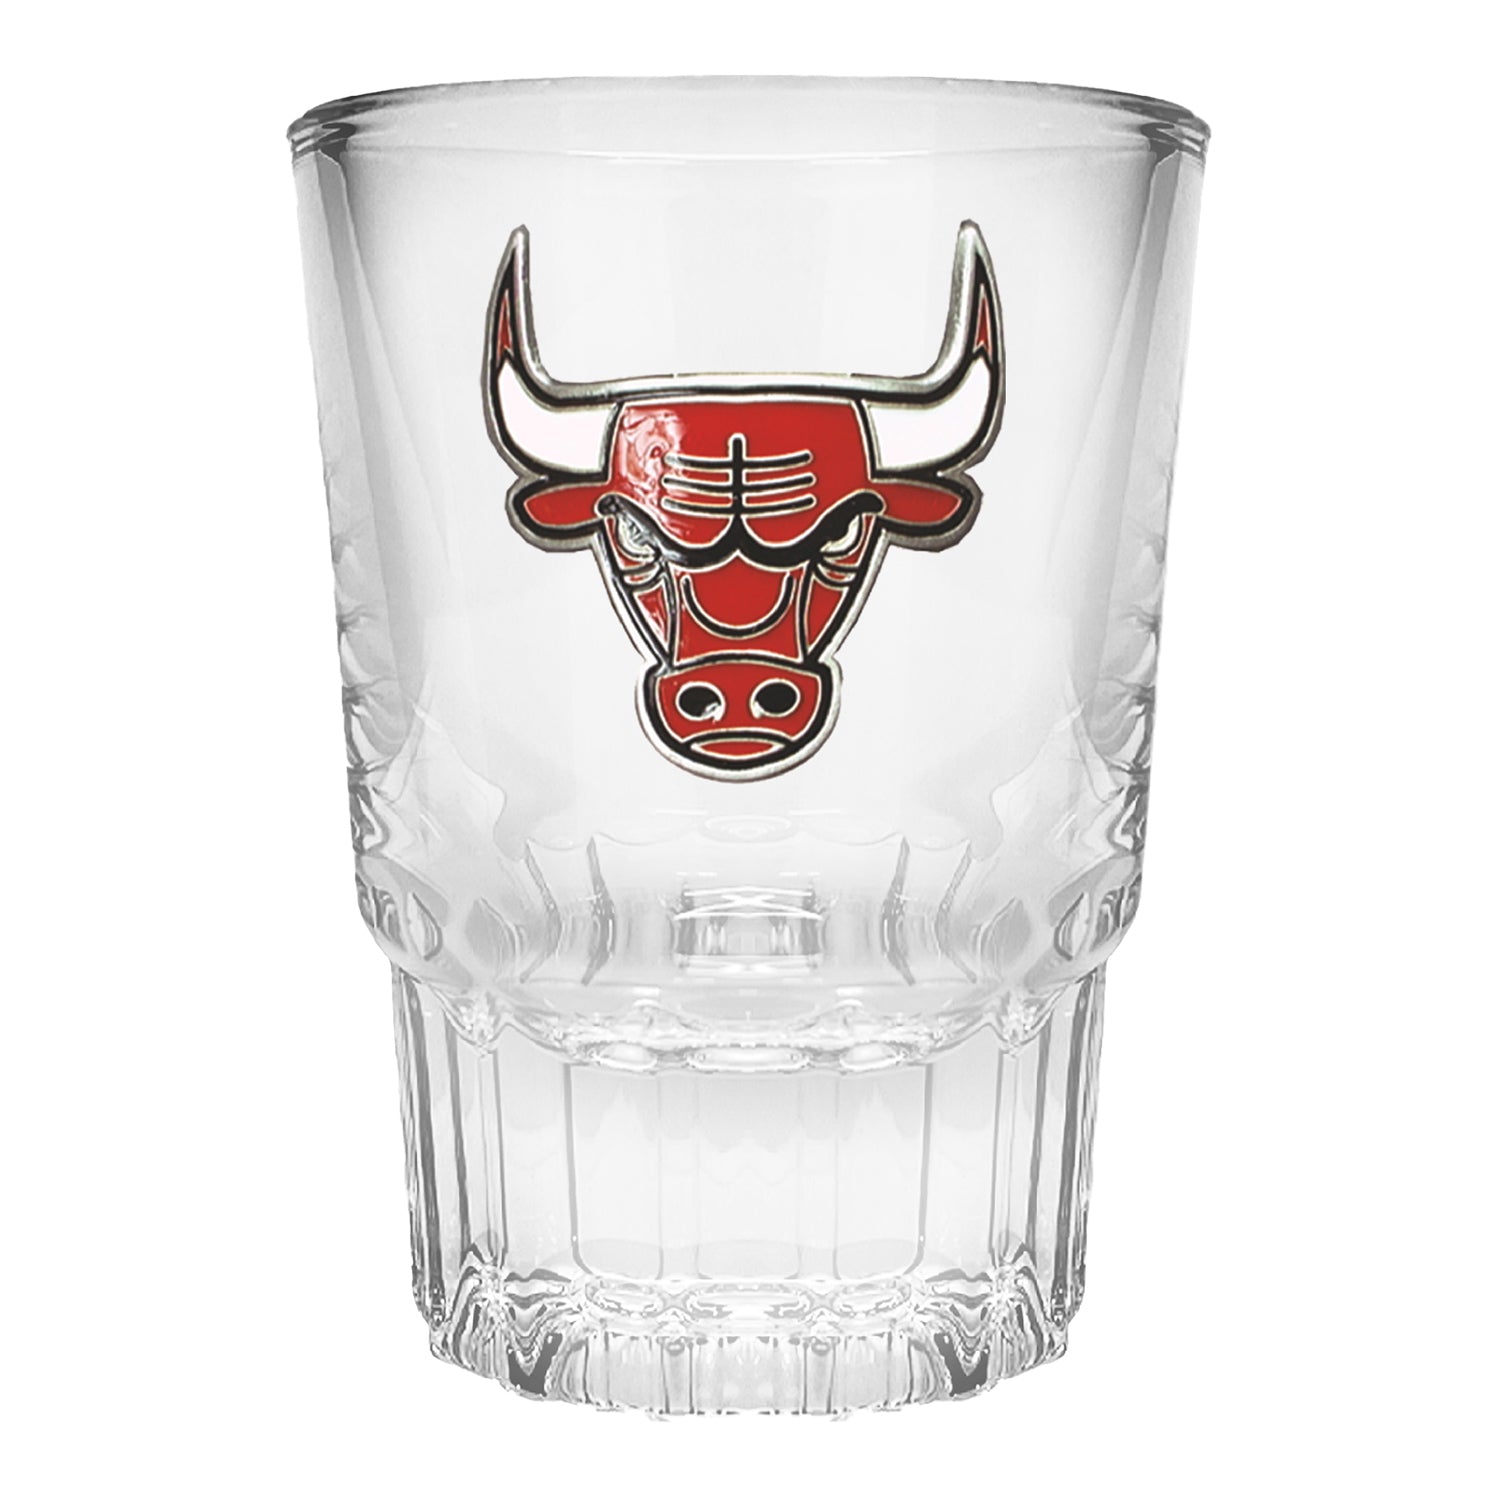 Chicago Bulls Prism Shot Glass - front view